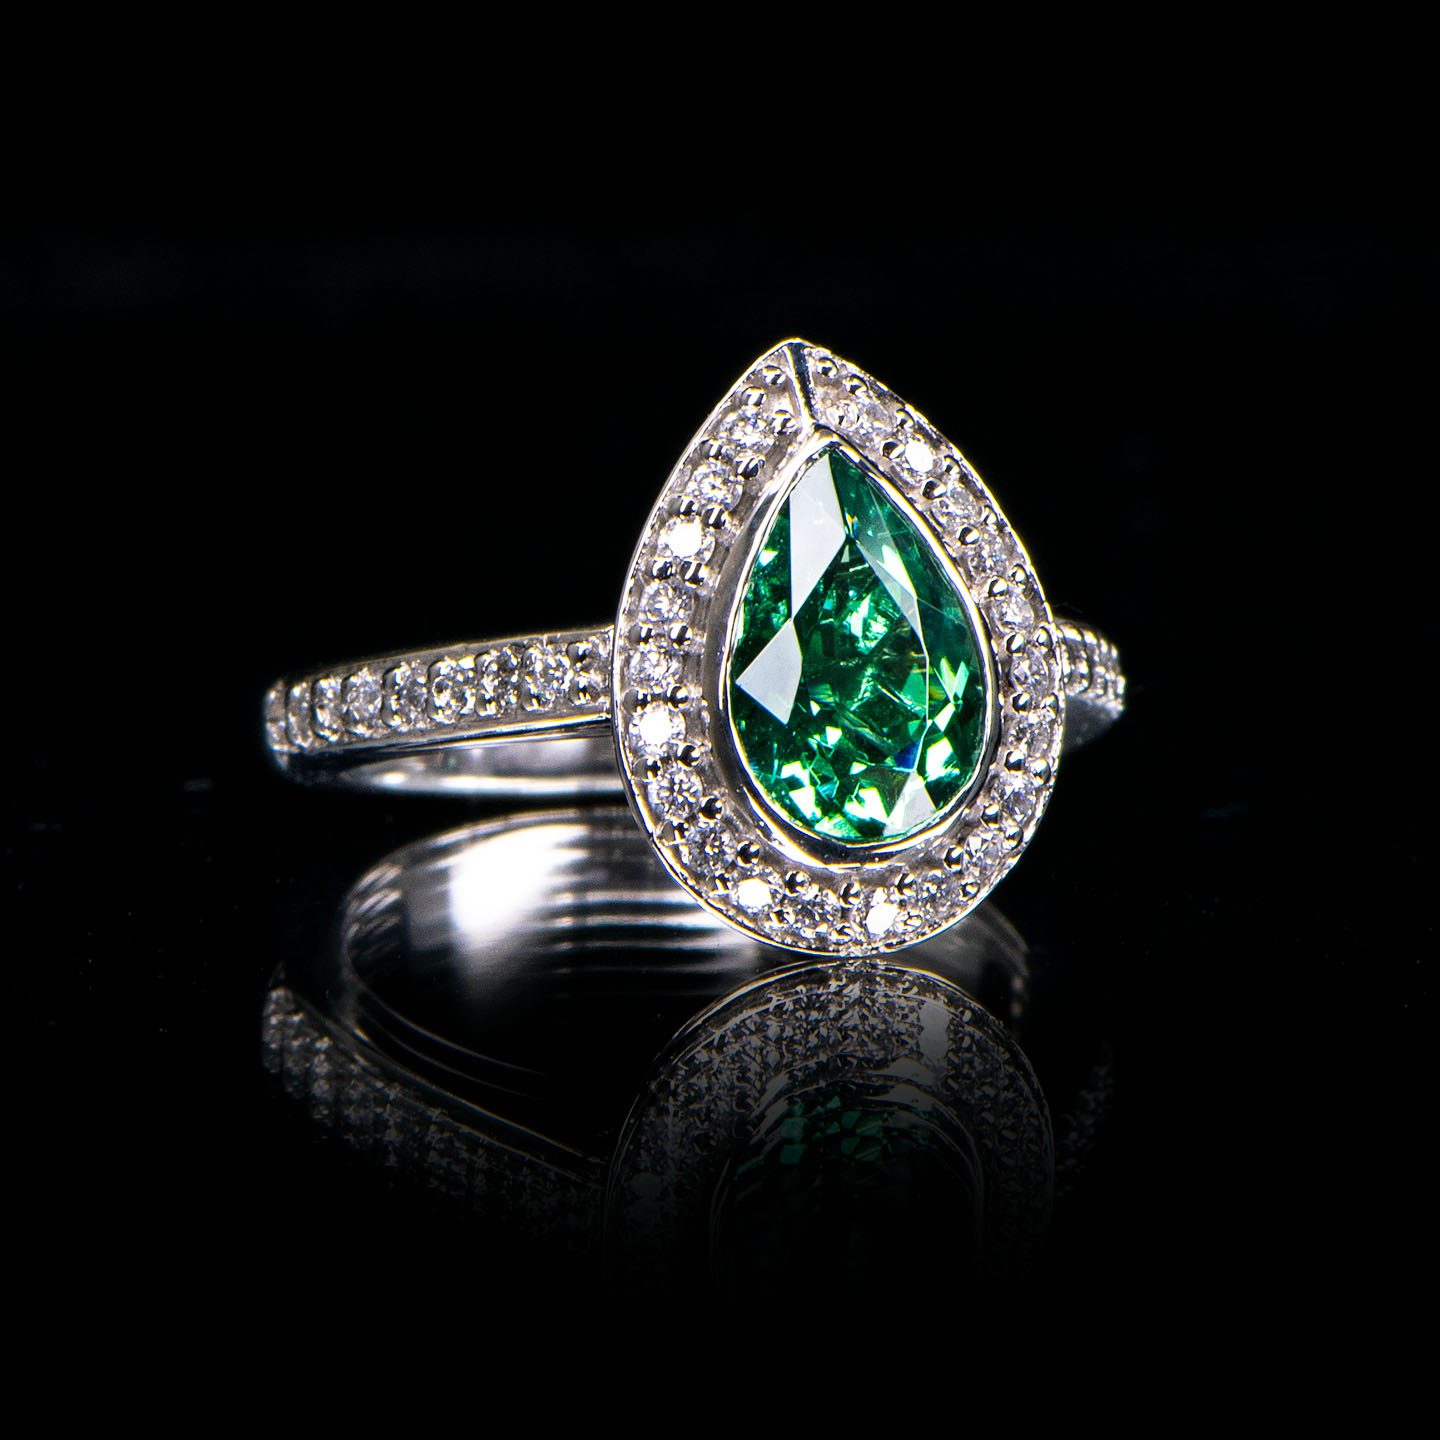 Emerald and diamond engagement or cocktail or anniversary ring in white gold